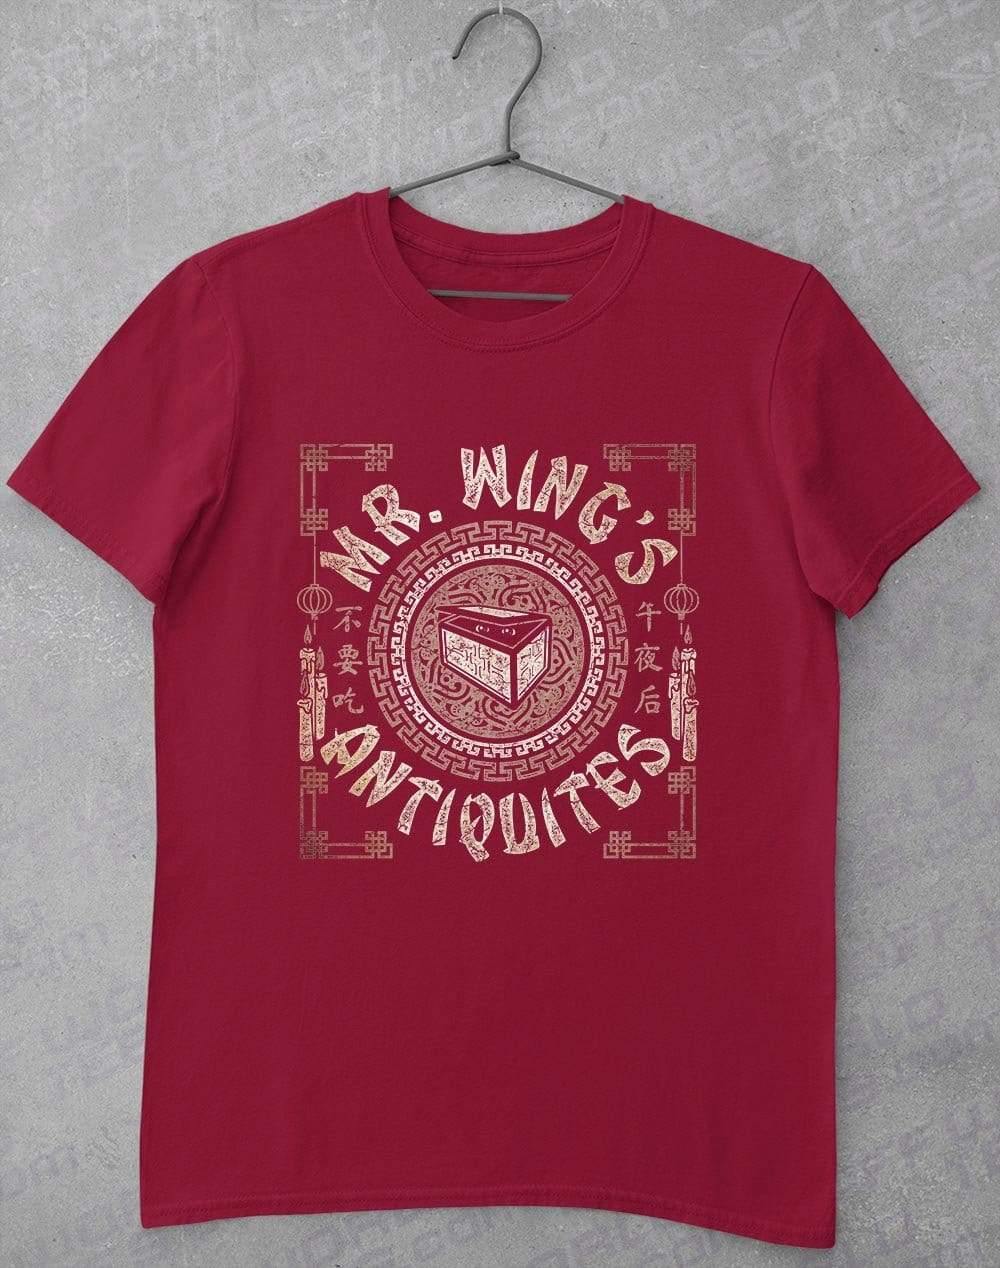 Mr Wing's Antiquites T-Shirt S / Cardinal Red  - Off World Tees